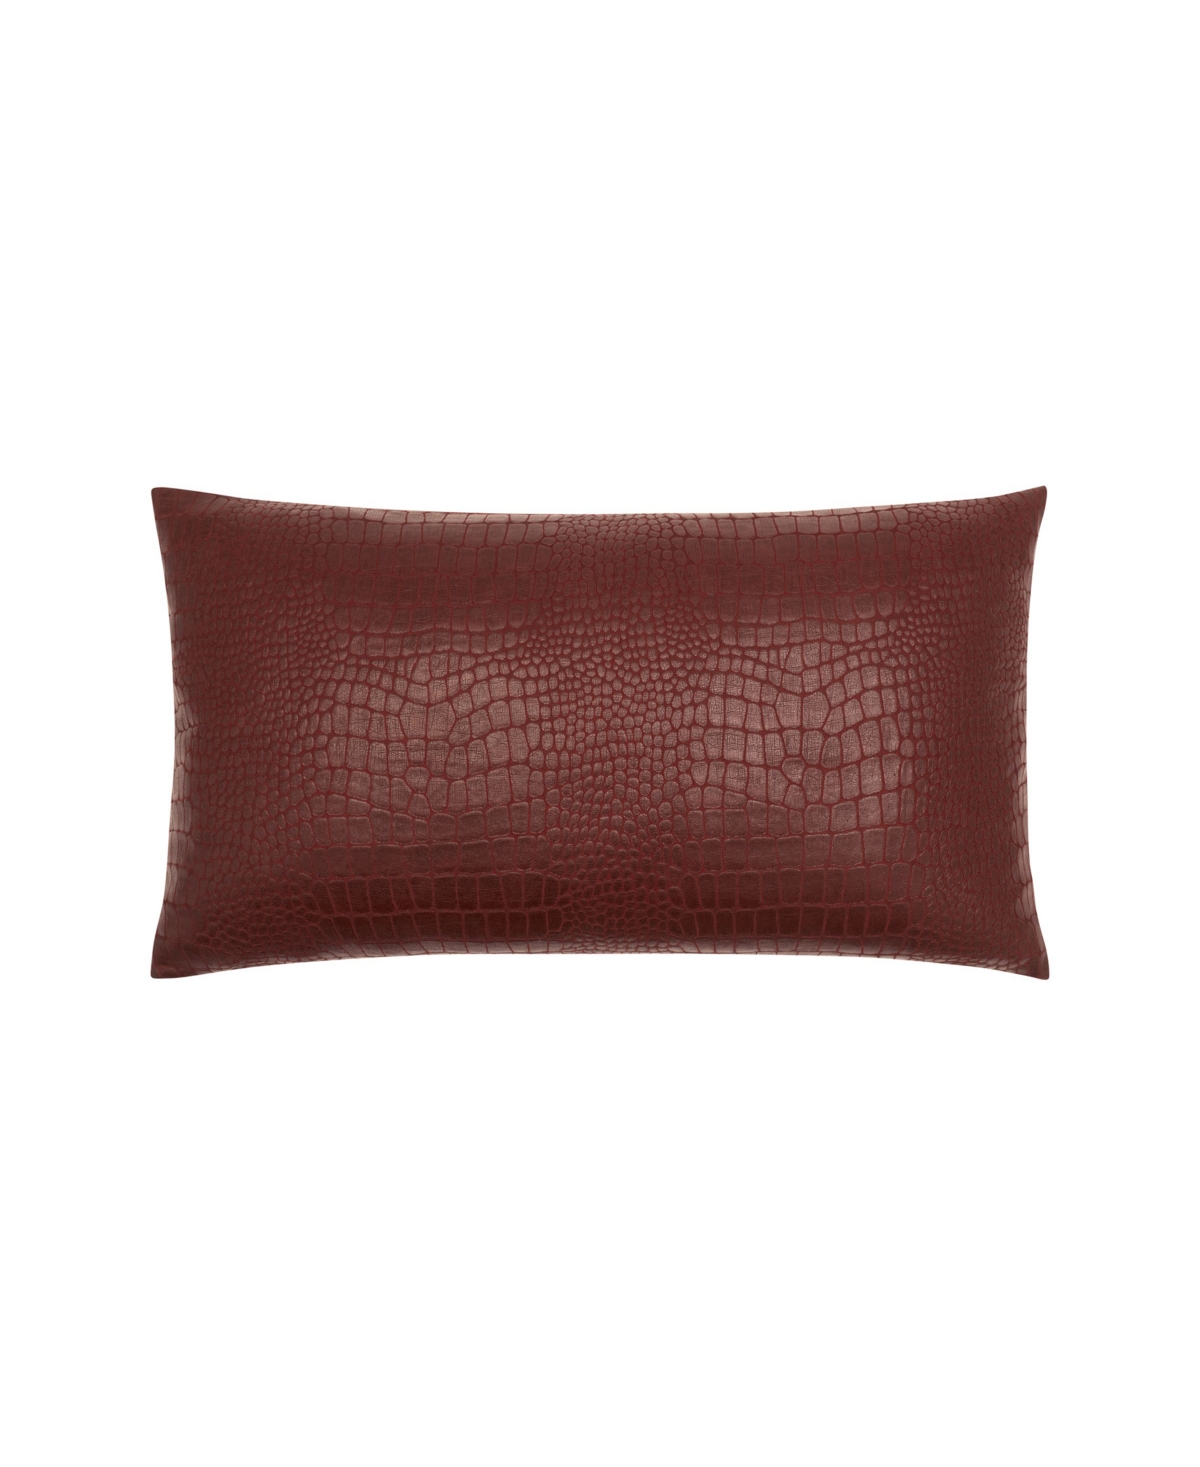 Patricia Nash Faux Crocodile Embossed Decorative Pillow, 20" X 20" In Red